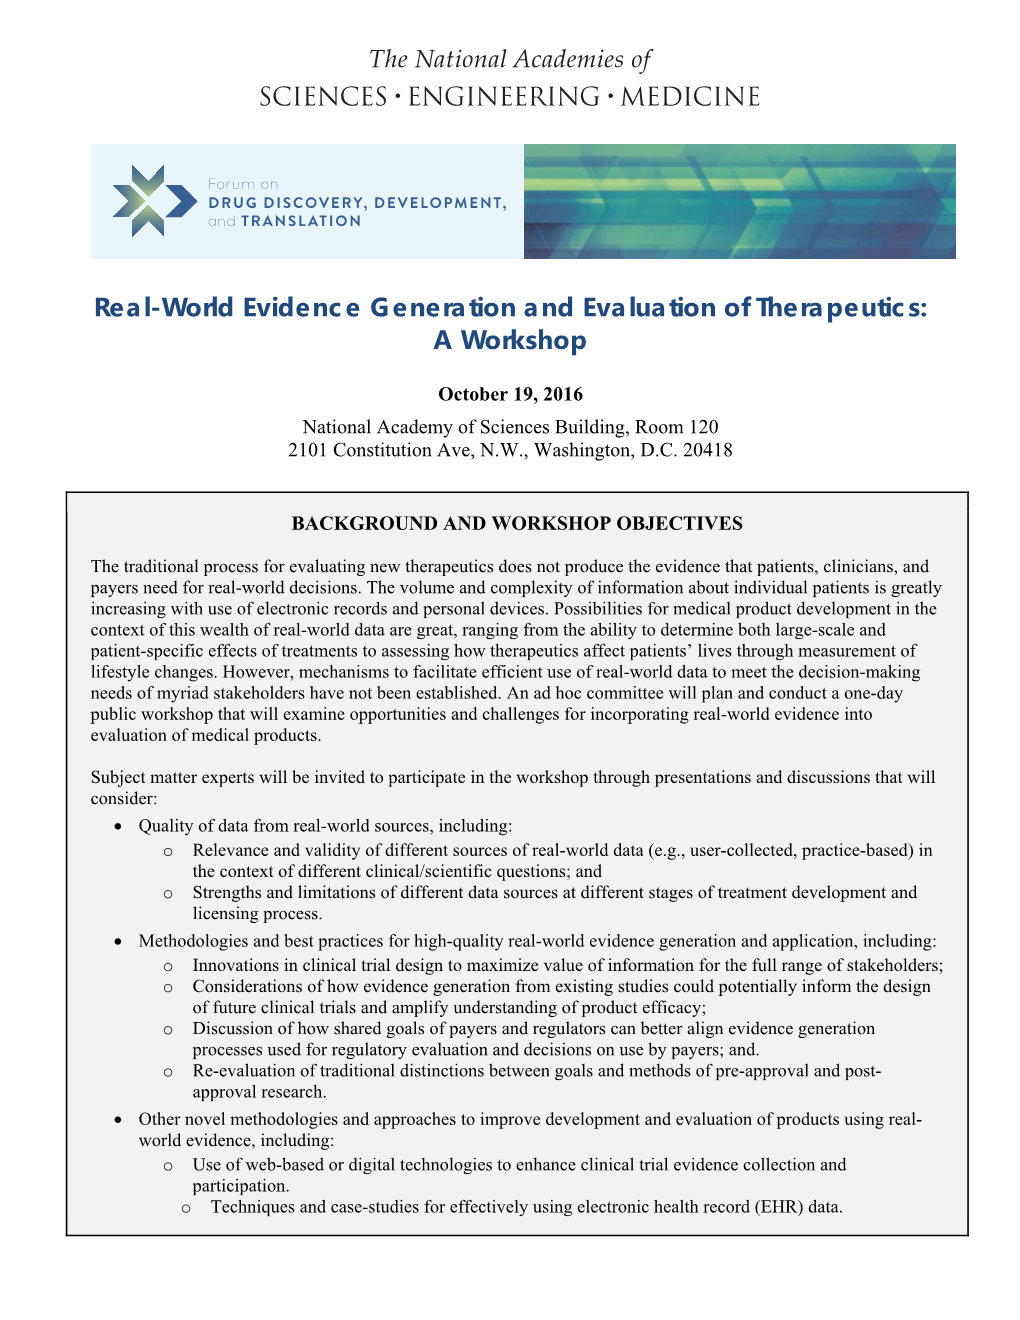 Real-World Evidence Generation and Evaluation of Therapeutics: a Workshop